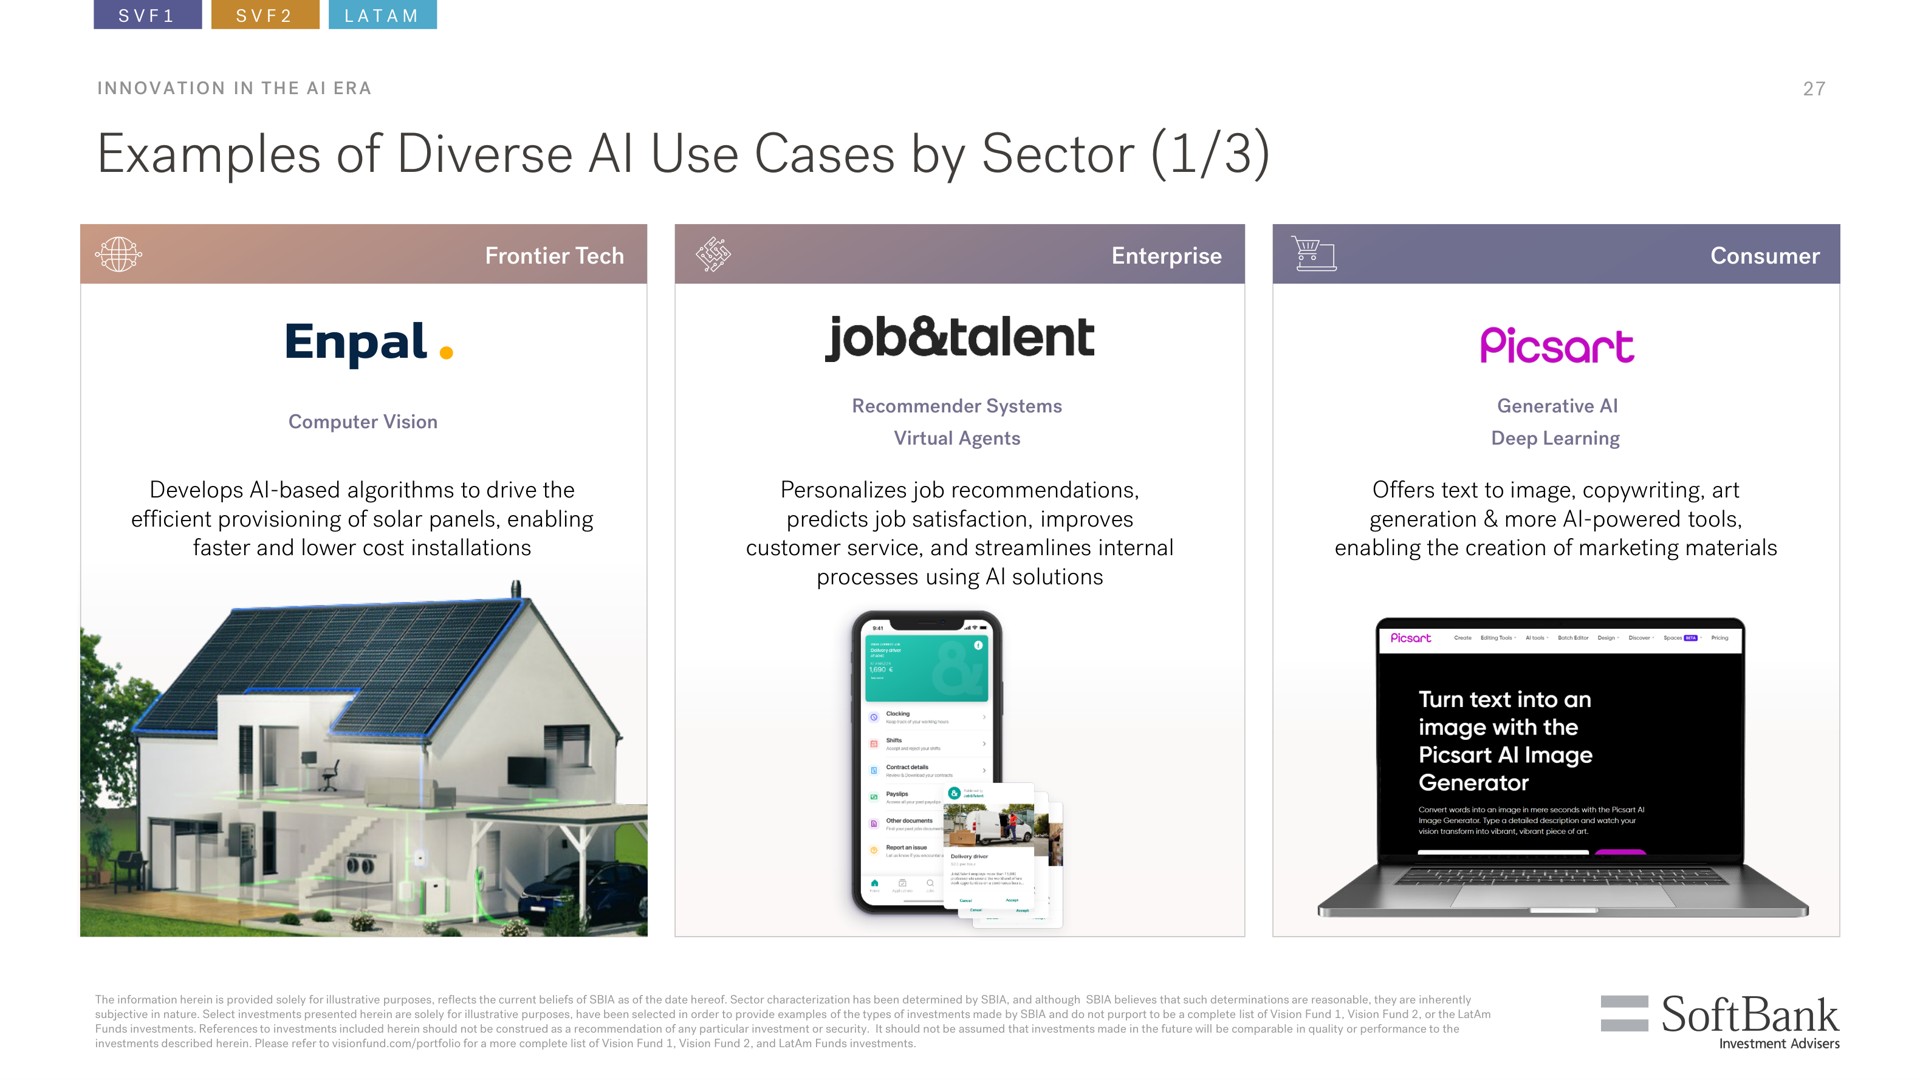 examples of diverse use cases by sector job talent | SoftBank